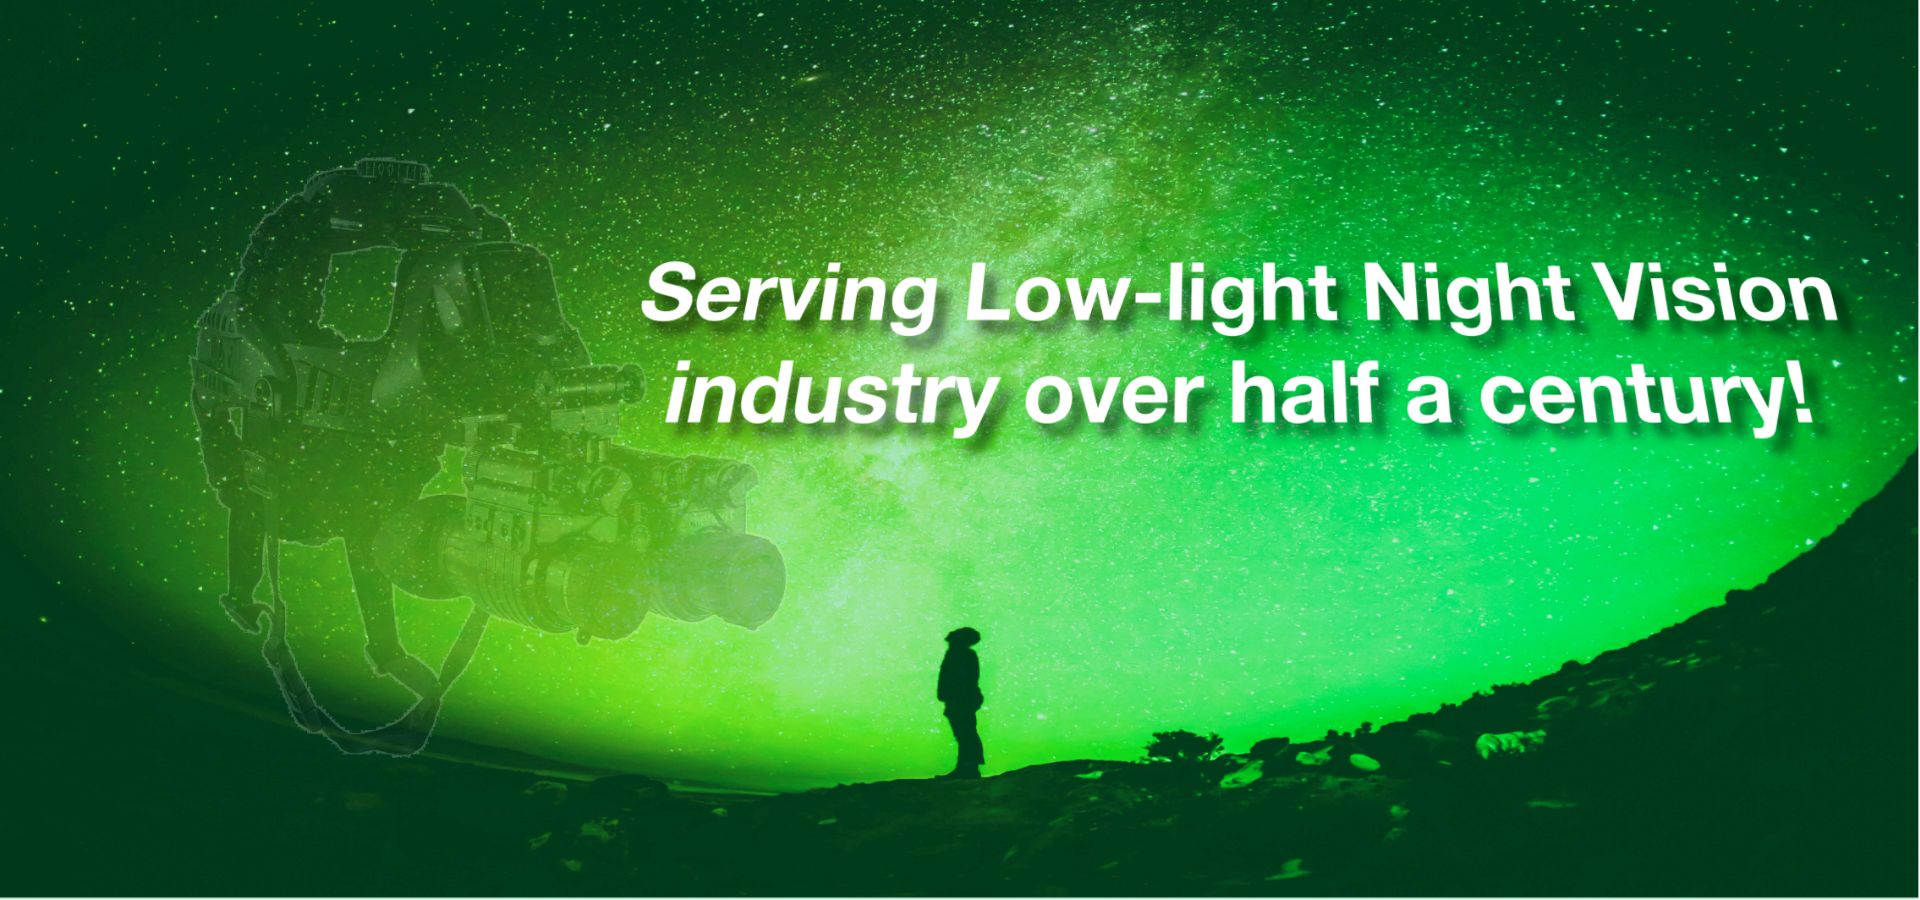 SERVING LOW-LIGHT NIGHT VISION INDUSTRY OVER HALF A CENTURY